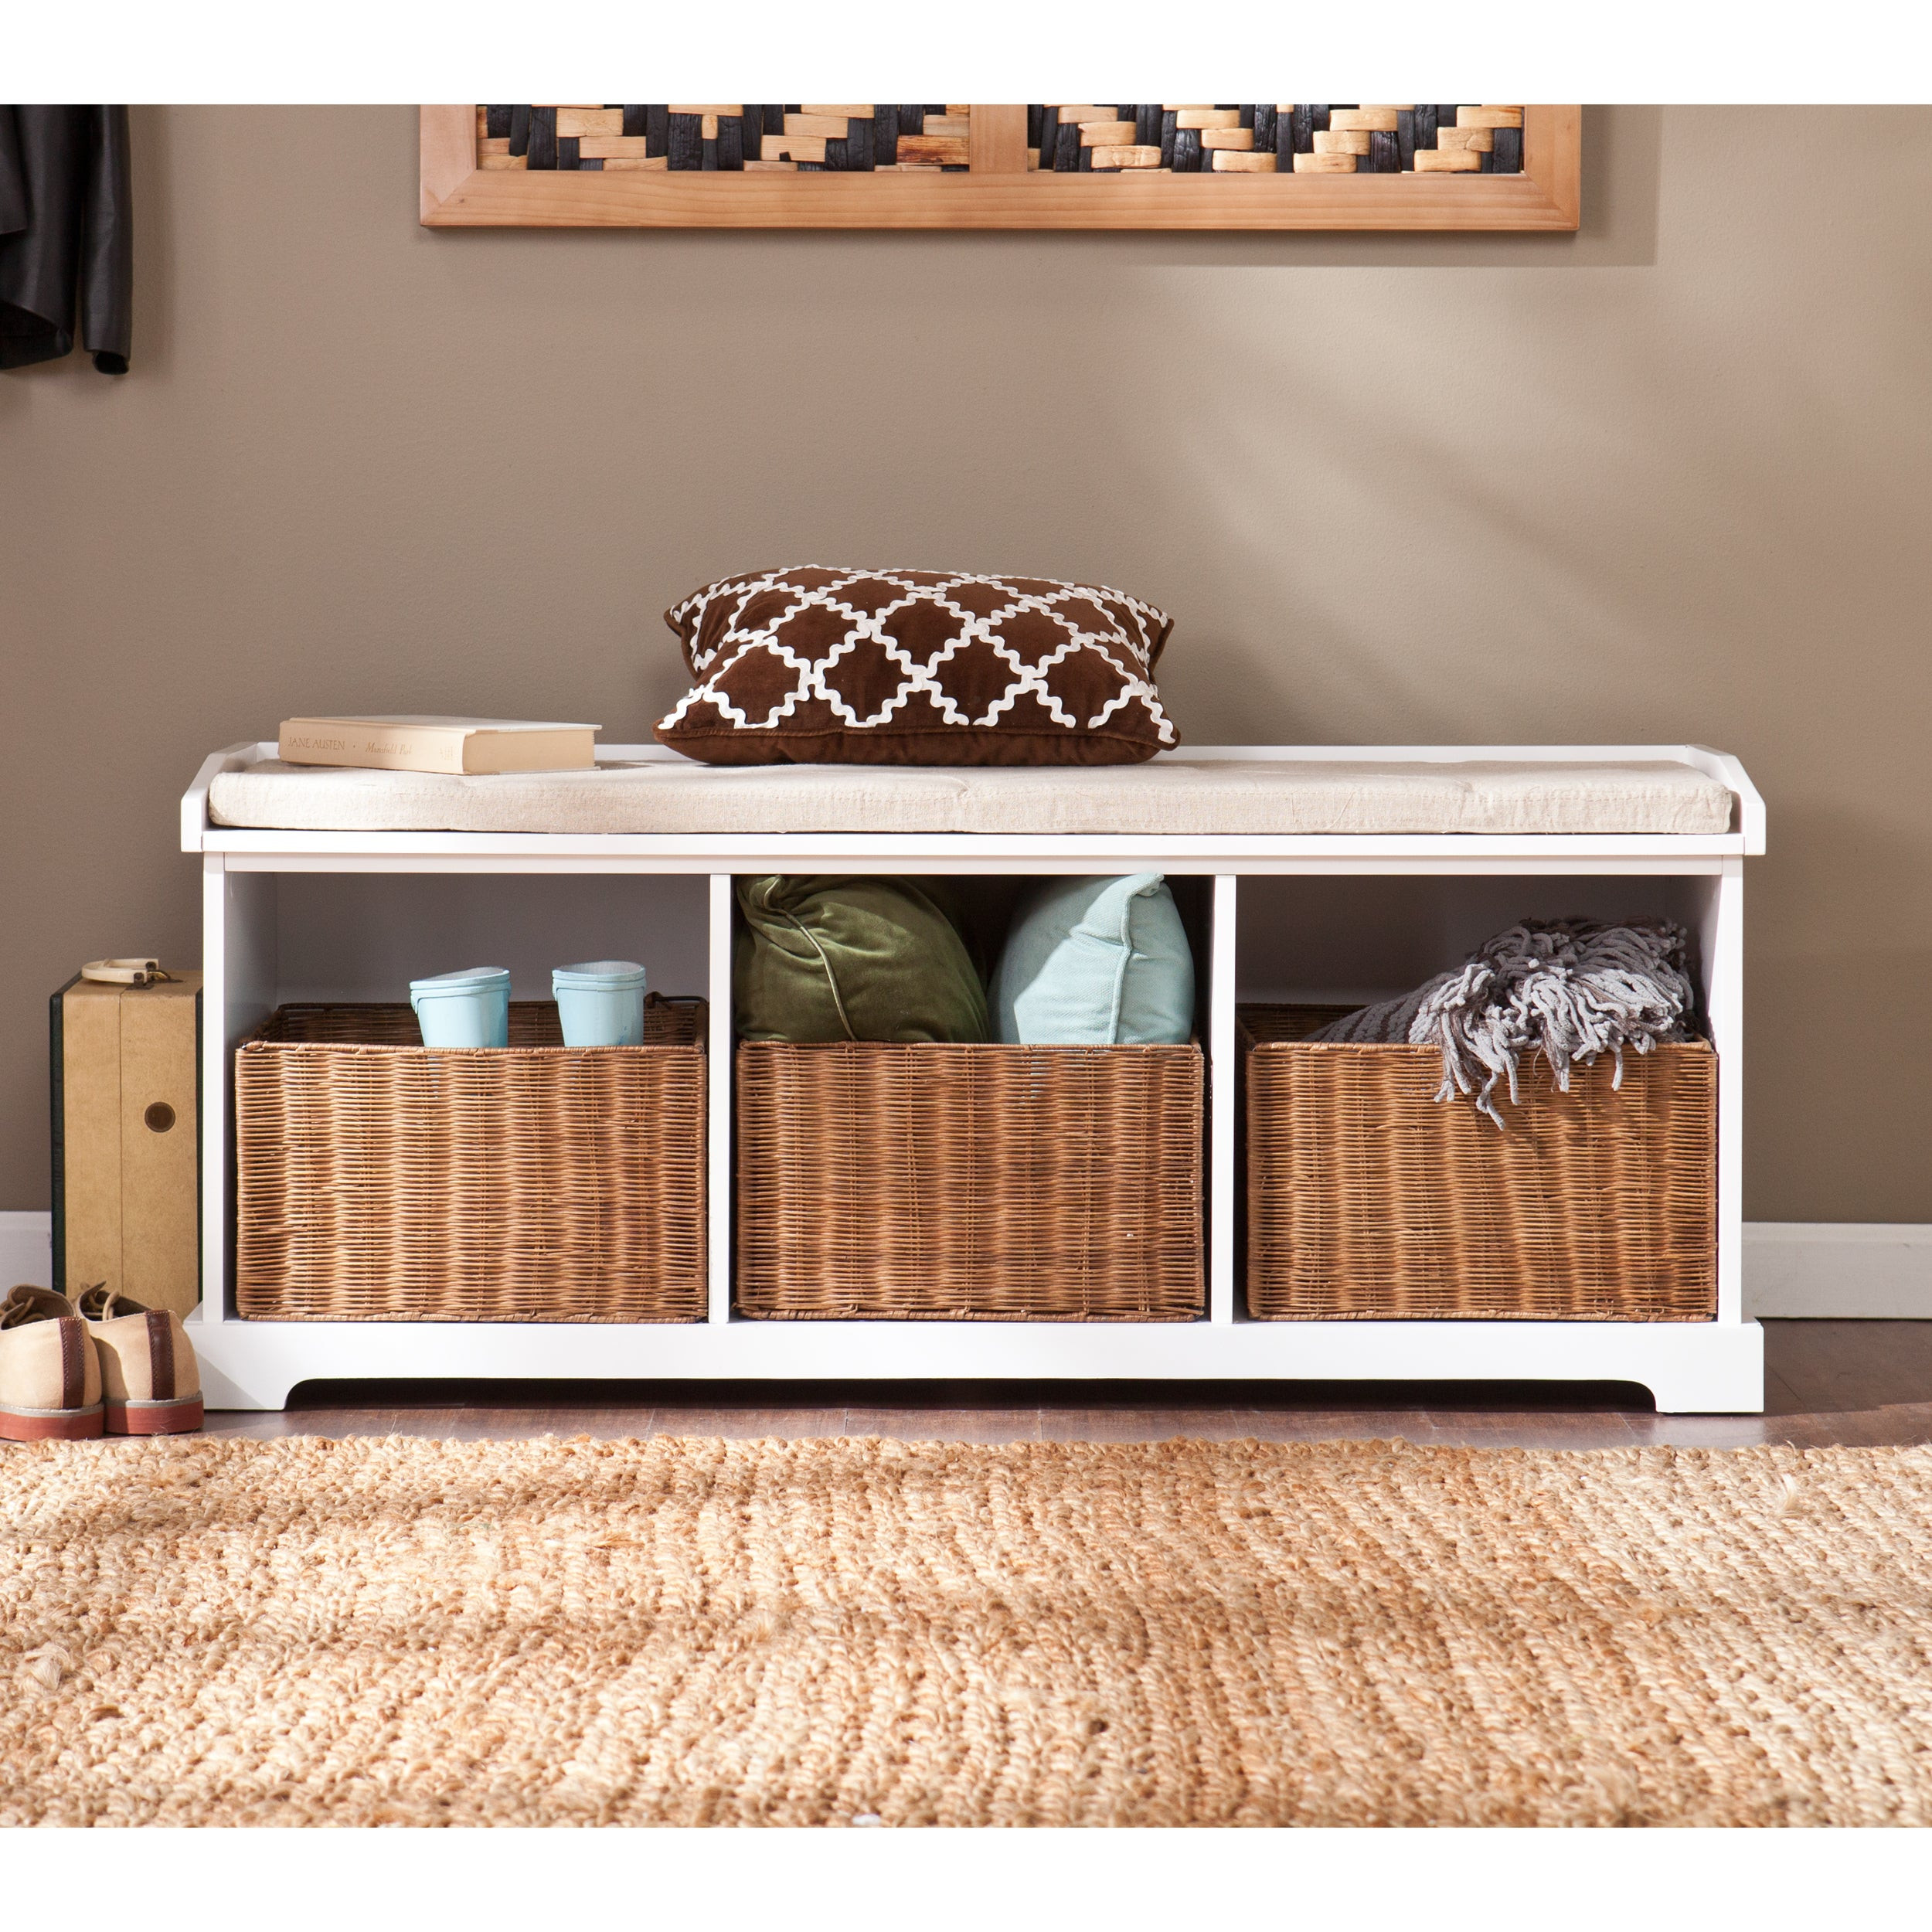 Entry Way Storage Bench
 Shop Harper Blvd Lima White Entryway Storage Bench Free Shipping Orders Over $45